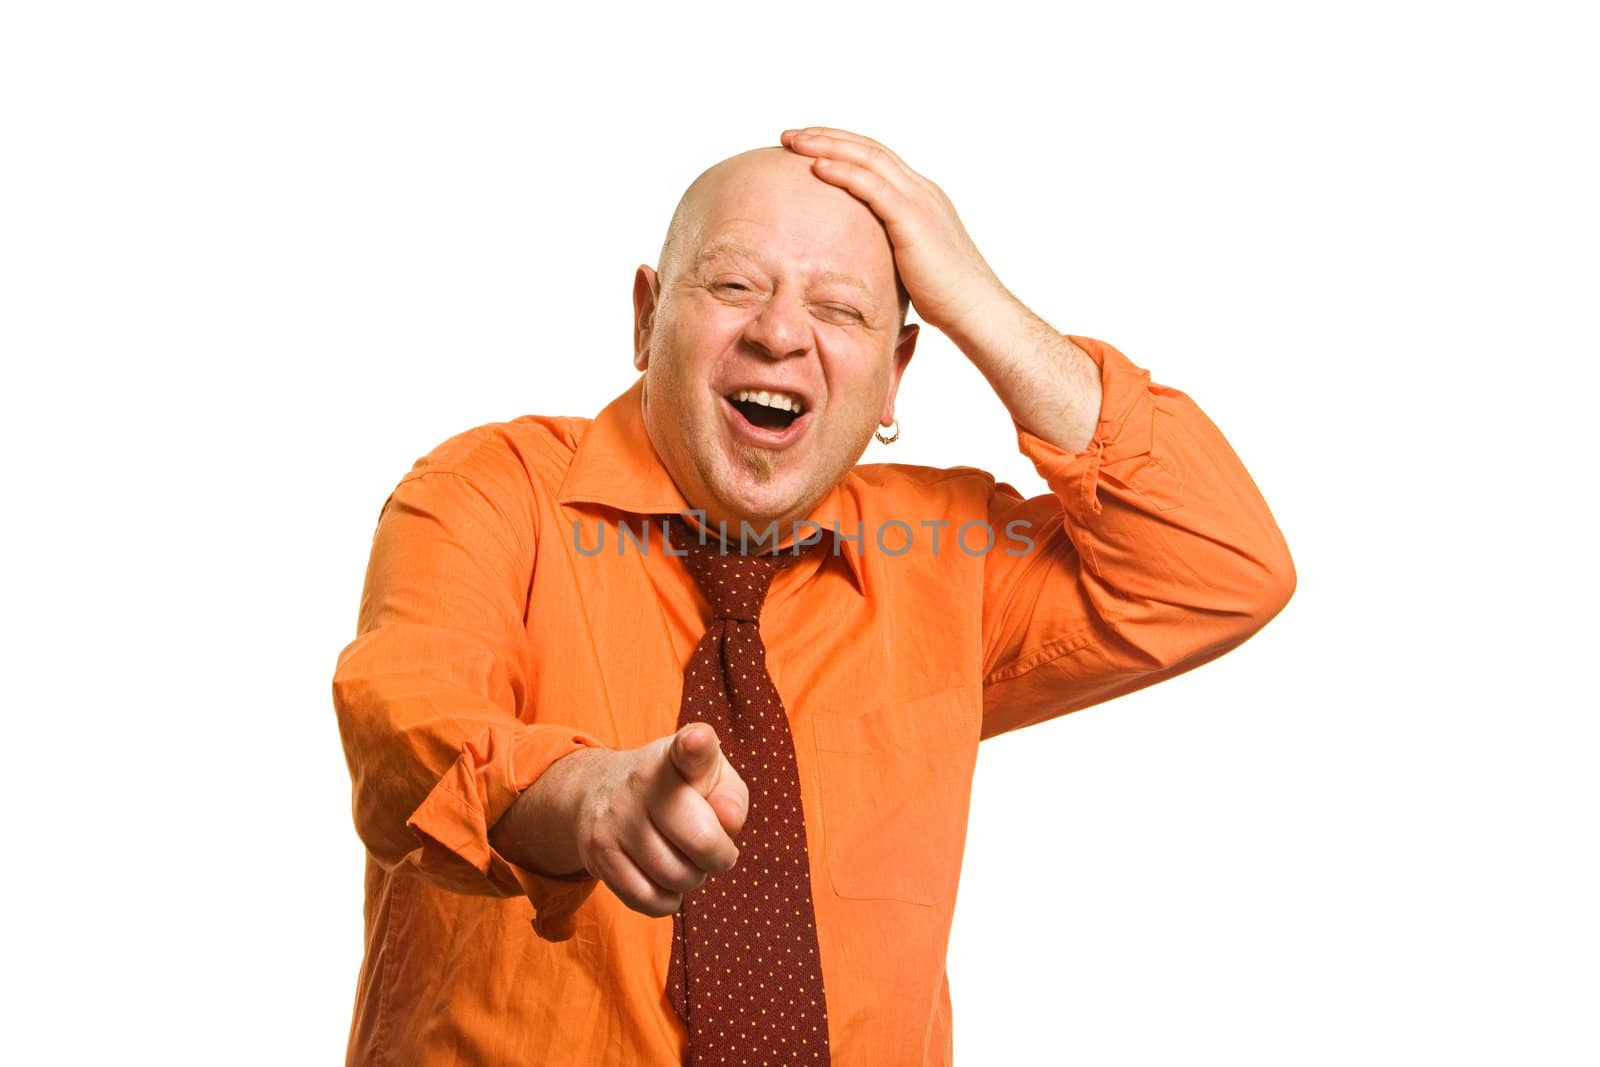 Cheerful comical bald man in an orange shirt and a red tie on a white background 
